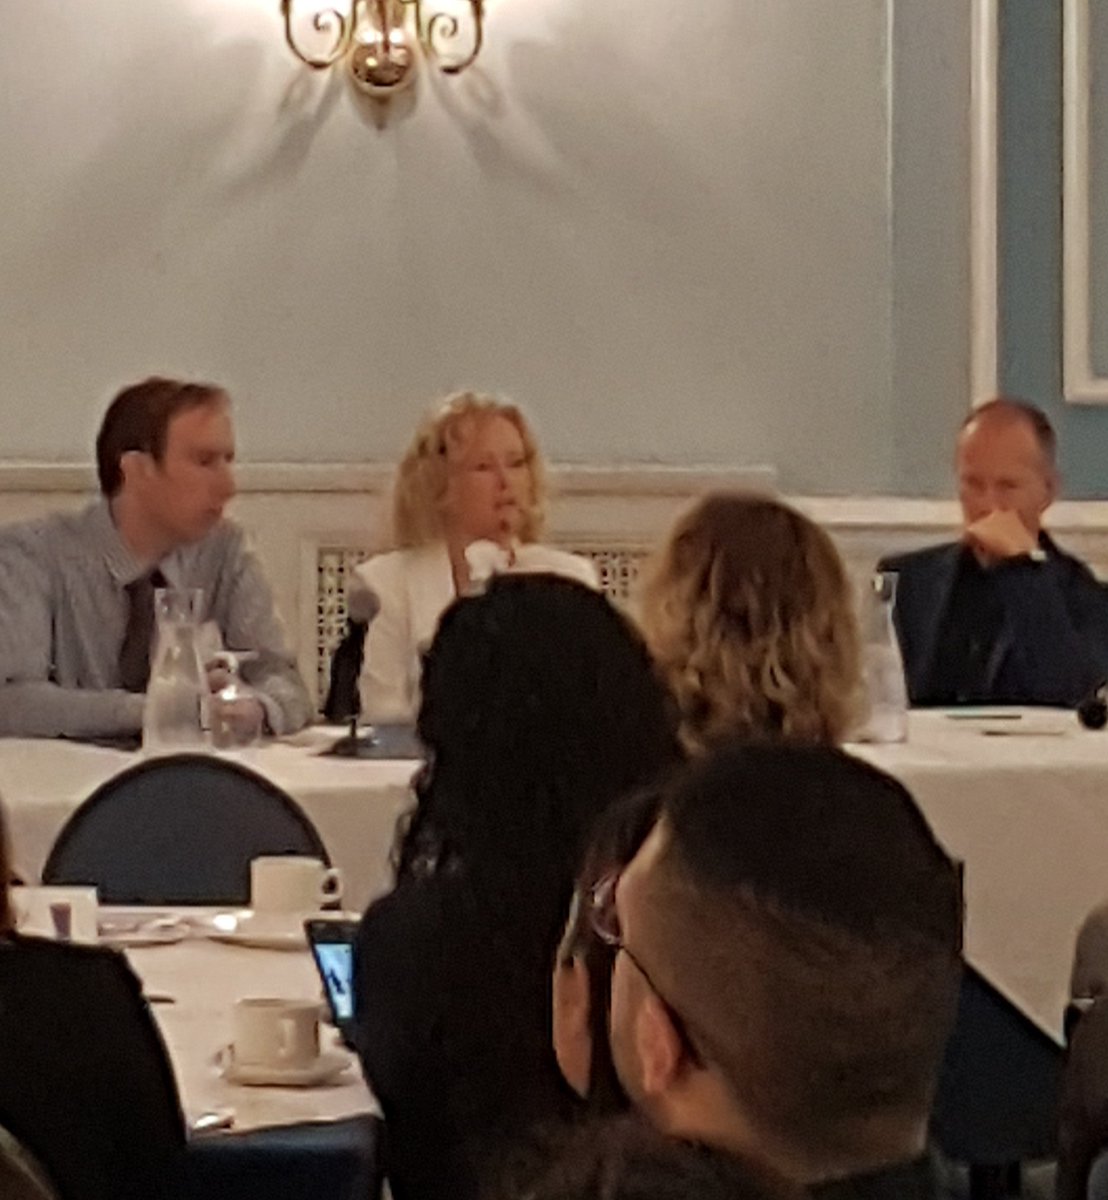 Our panel on education, technology, AI and mental health moderated by @DrPeterSelby with Dr. Alison Crawford @Medpoiesis, @JohnTorousMD, Dr. Brian Hodges @BDHodges1 #EduAchieve @camhEdu